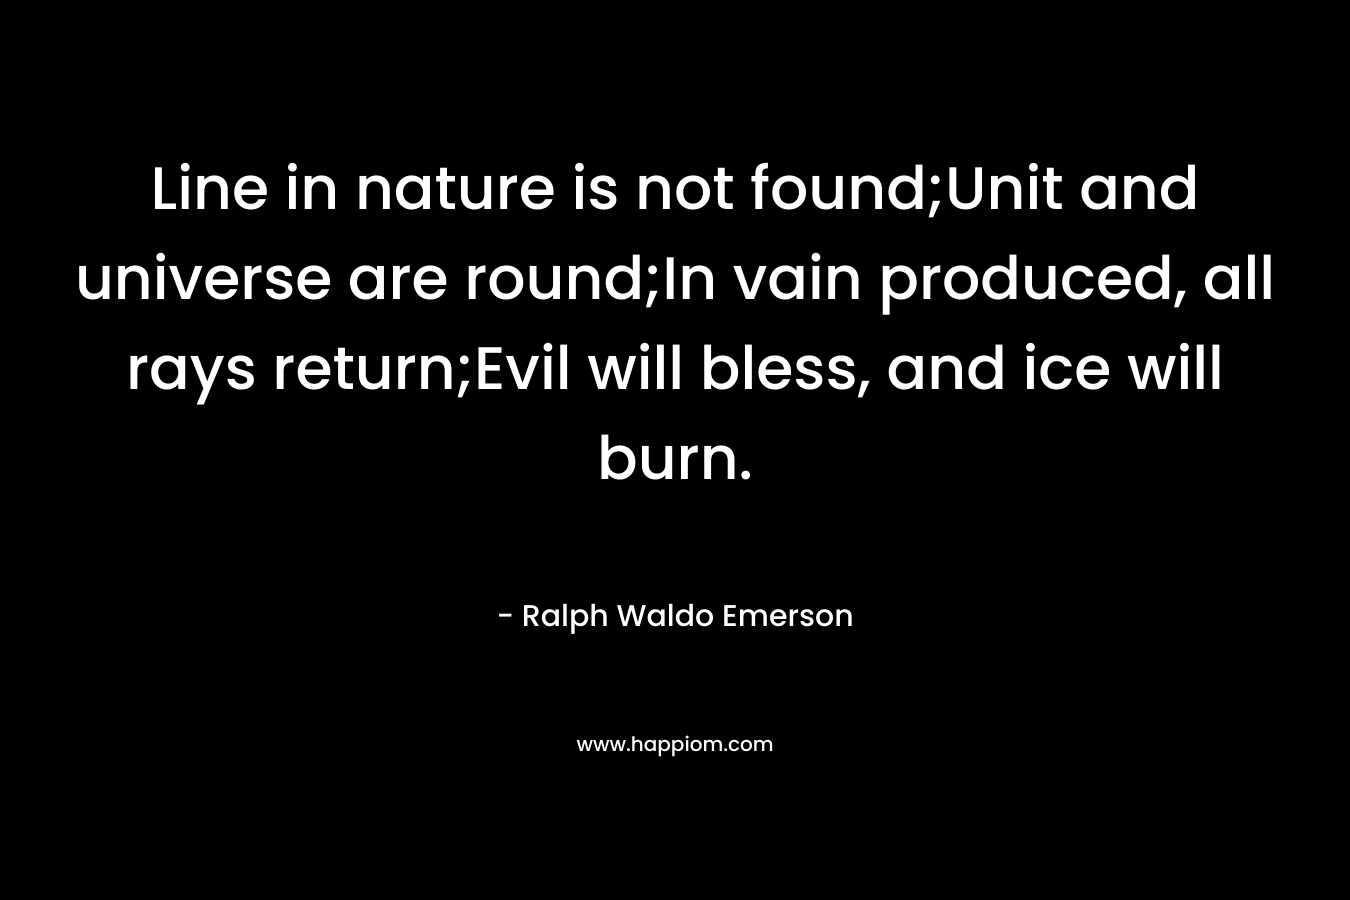 Line in nature is not found;Unit and universe are round;In vain produced, all rays return;Evil will bless, and ice will burn. – Ralph Waldo Emerson